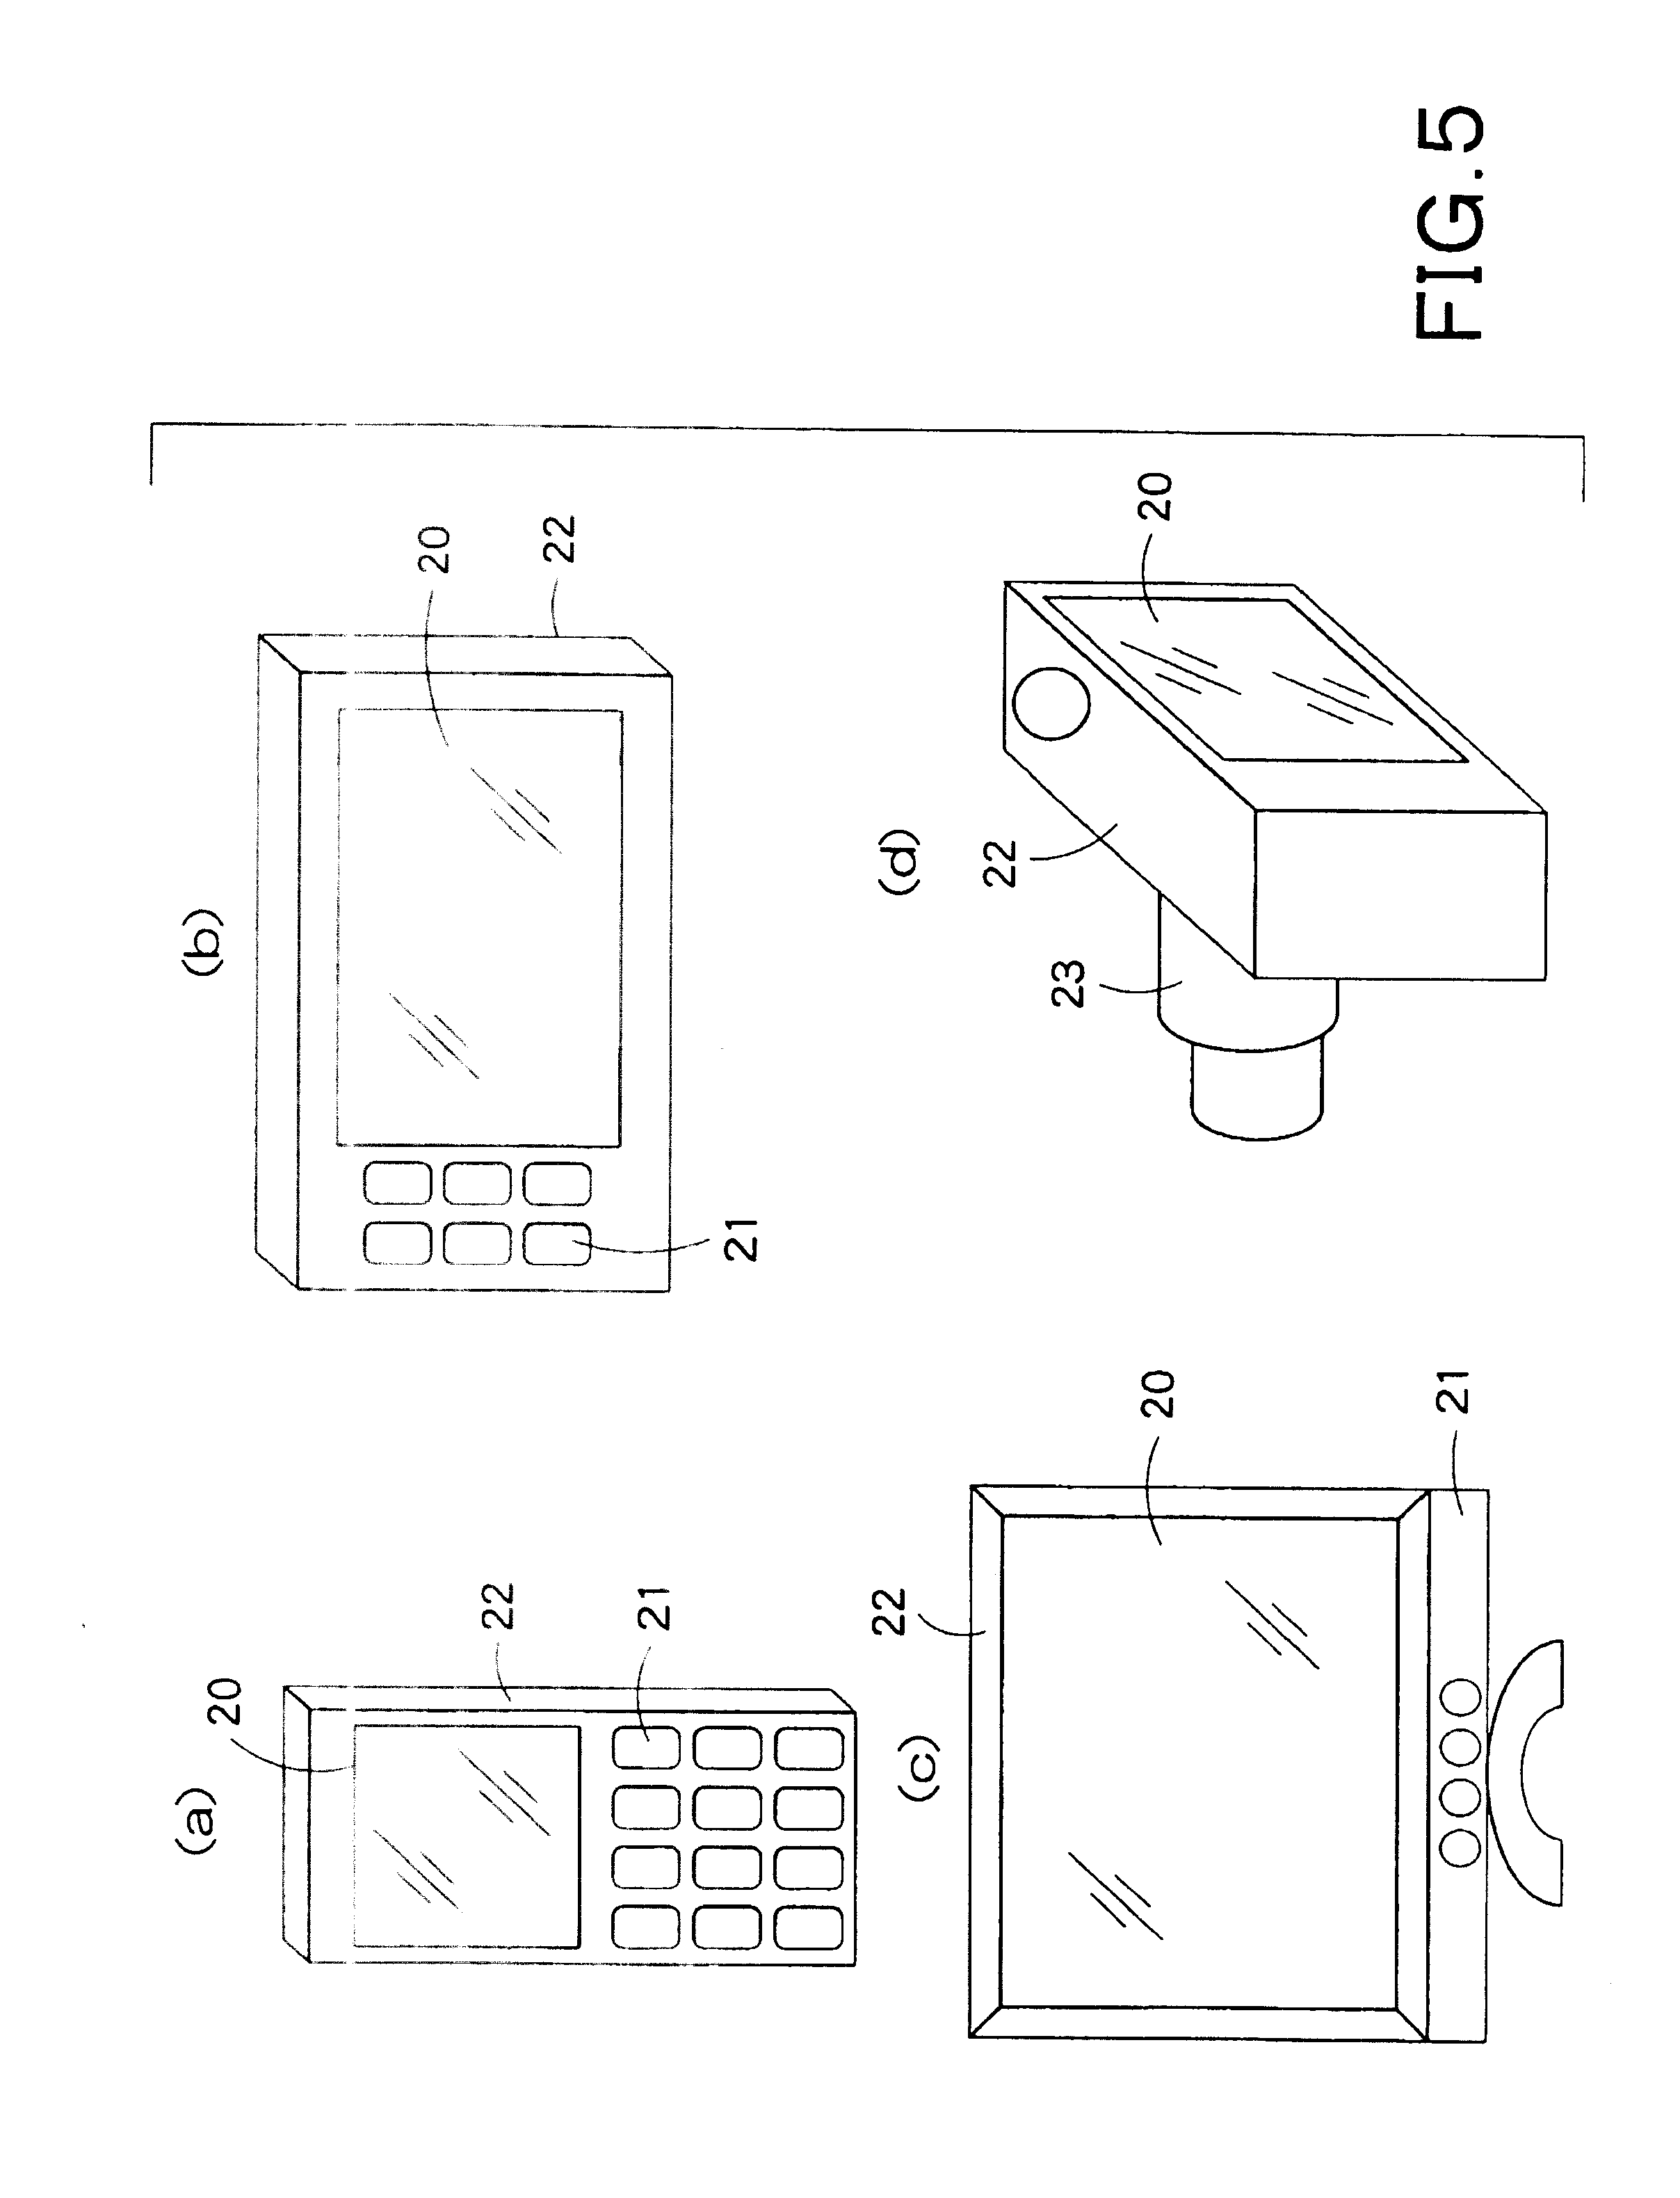 Ga-base alloy and organic function element using the same